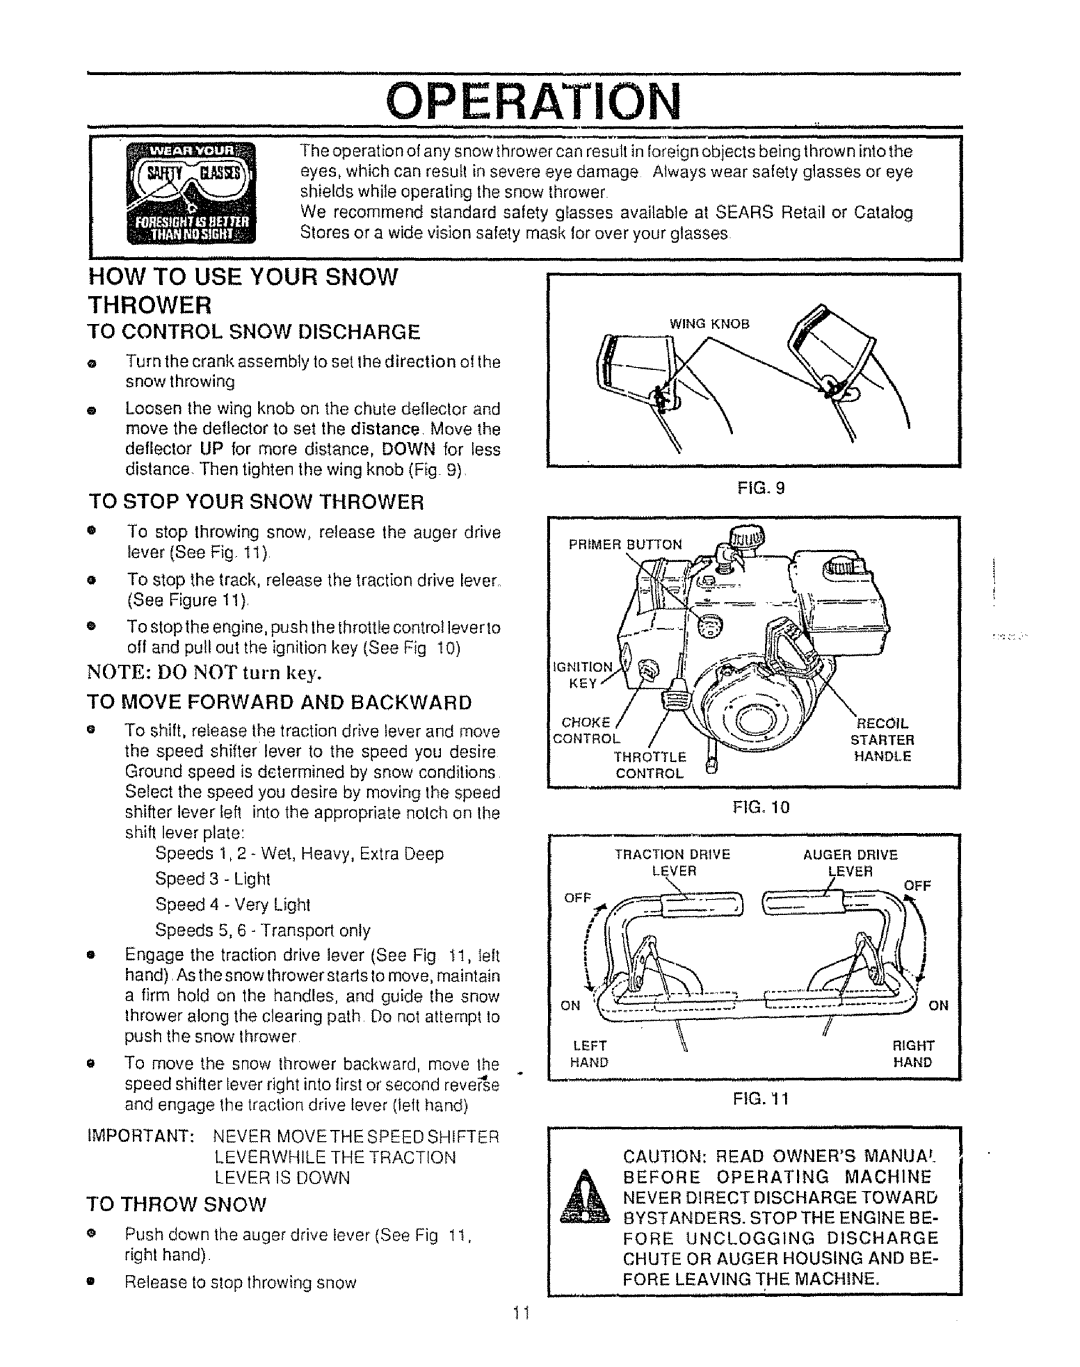 Sears 536.886531 owner manual Operation, HOW to USE Your Snow Thrower, To Control Snow Discharge, To Stop Your Snow Thrower 